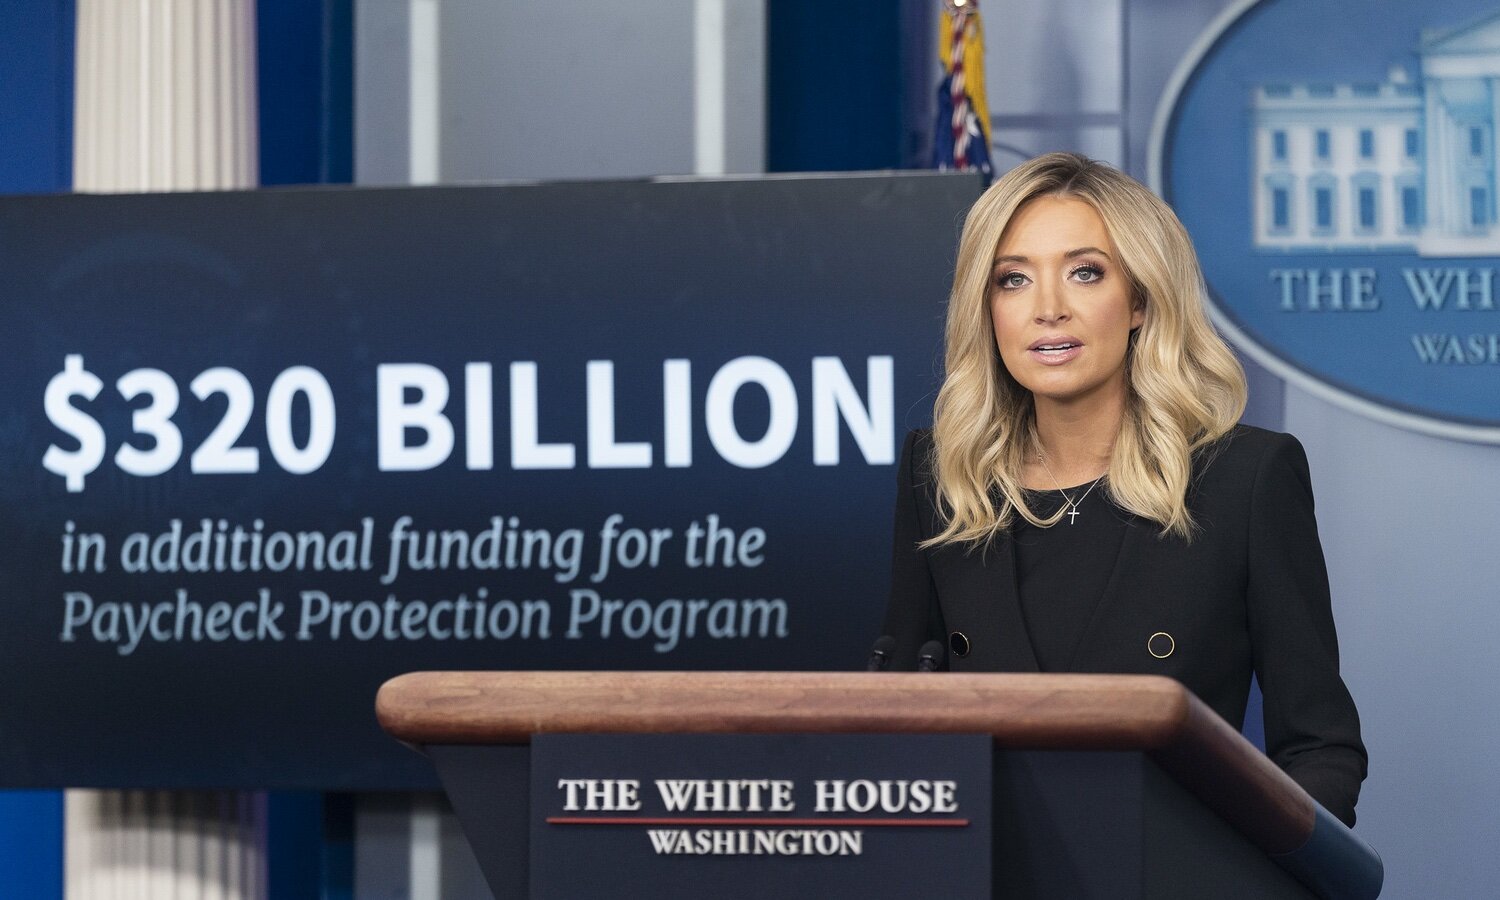 New White House Press Secretary Kayleigh McEnany addresses her remarks at a White House press briefing Friday, May 1, 2020, in the James S. Brady Press Briefing Room of the White House. (Official White House Photo by Joyce N. Boghosian). Source.